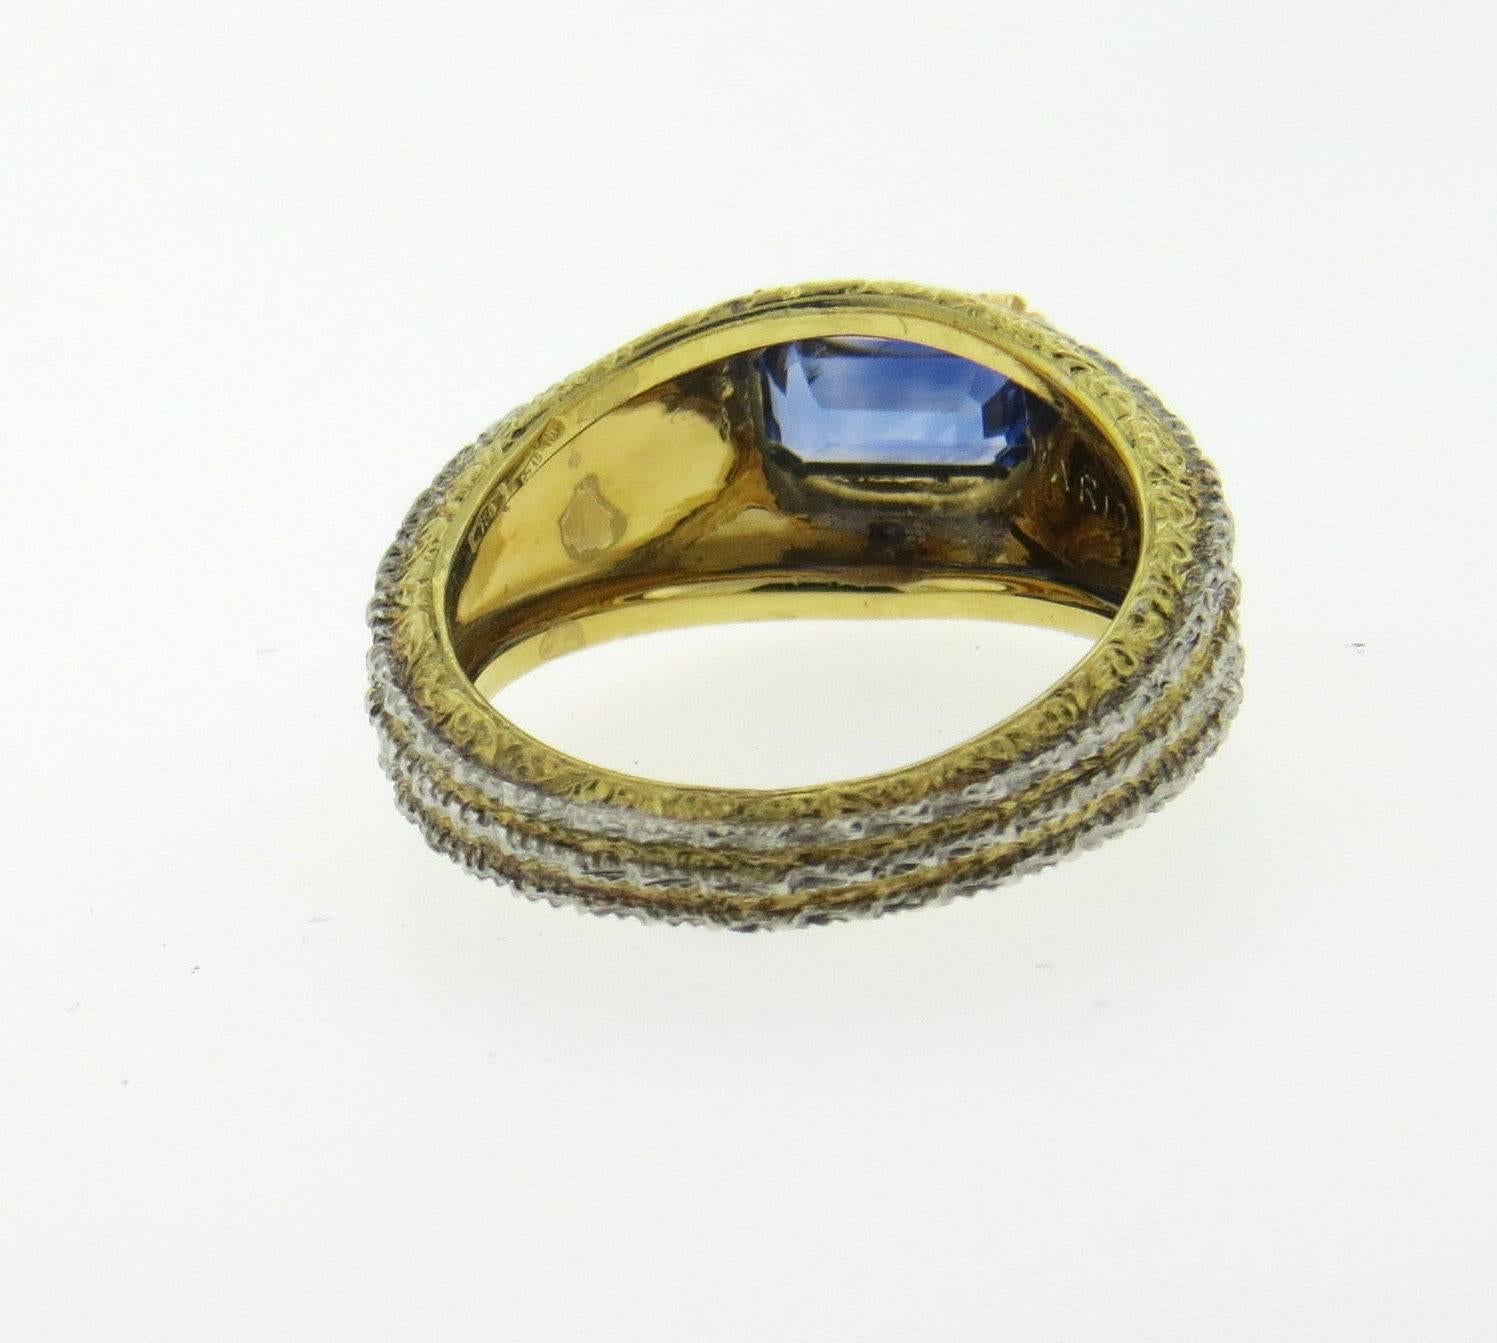 An 18k yellow and white gold ring set with a sapphire measuring 6.4mm x 4mm.  Crafted by Mario Buccellati, the ring is a size 5 1/2 and is 9.5mm at widest point  .  Marked: Mario Buccellati, 750.  The weight of the ring is 5.9 grams.  Comes with